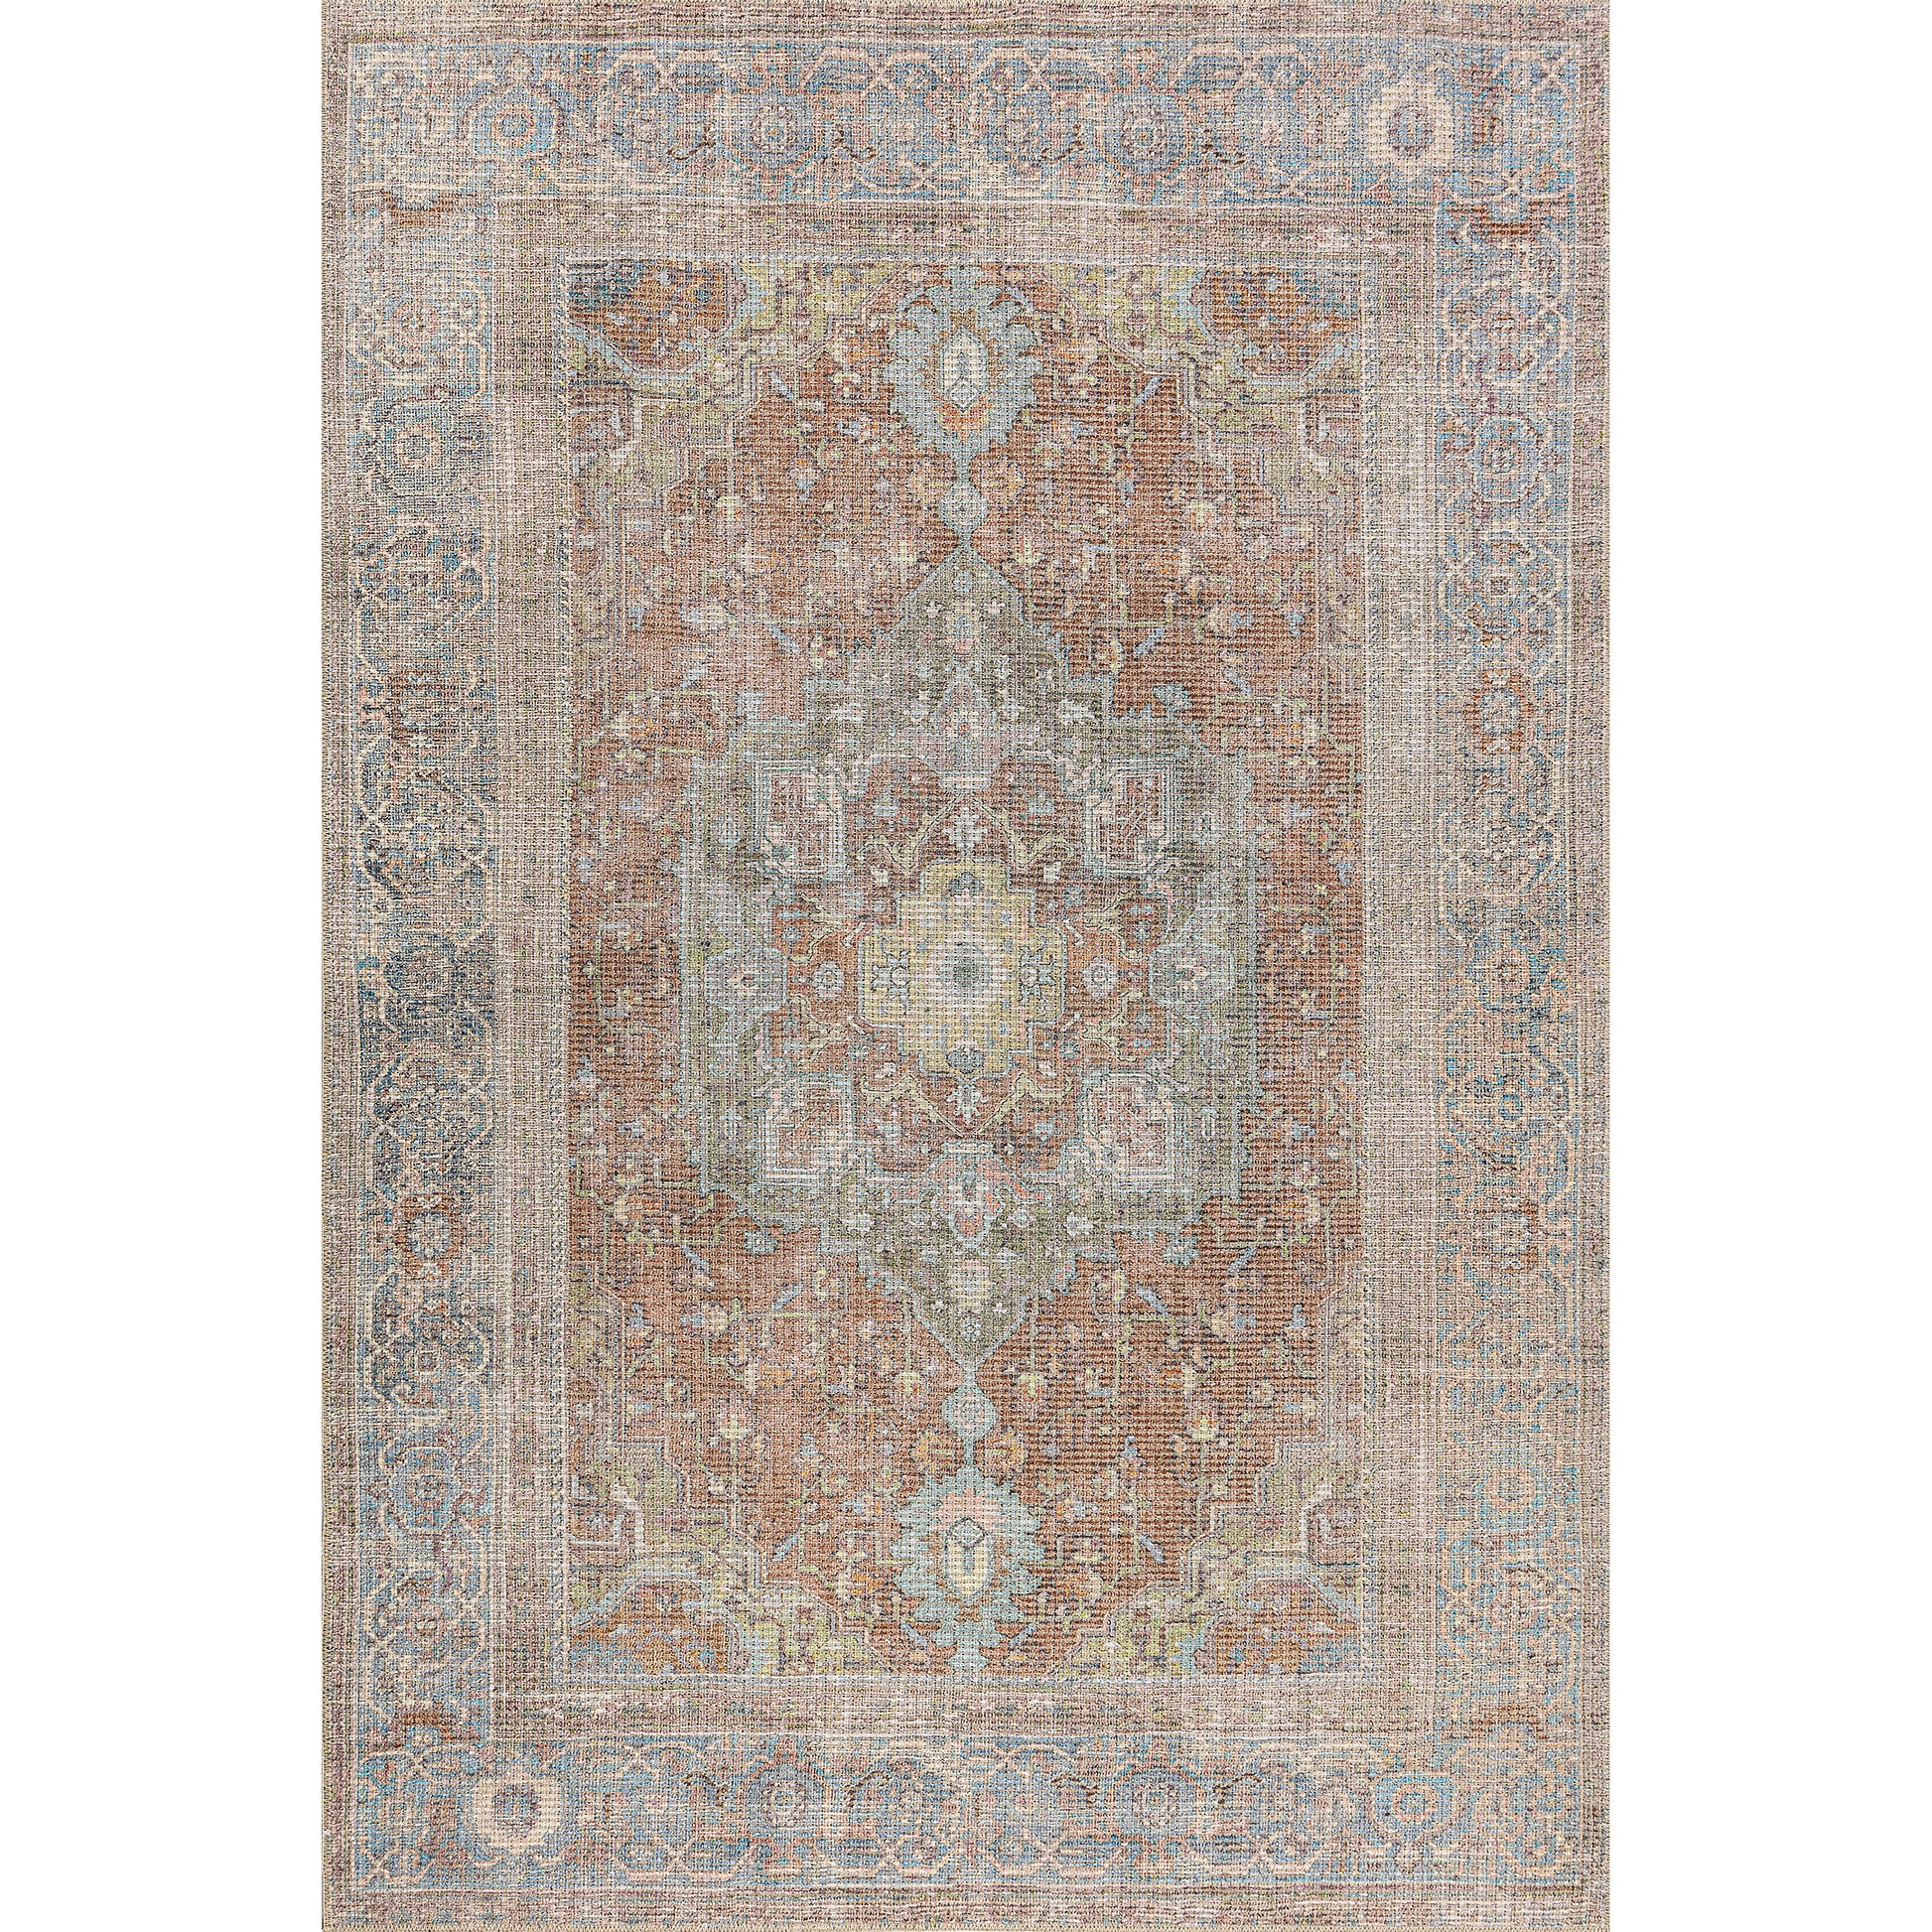 blue brown boho cotton and polyster machine washable traditional rustic area rug 2x8, 3x10, 2x10 ft Long Runner Rug, Hallway, Balcony, Entry Way, Kitchen, Stairs